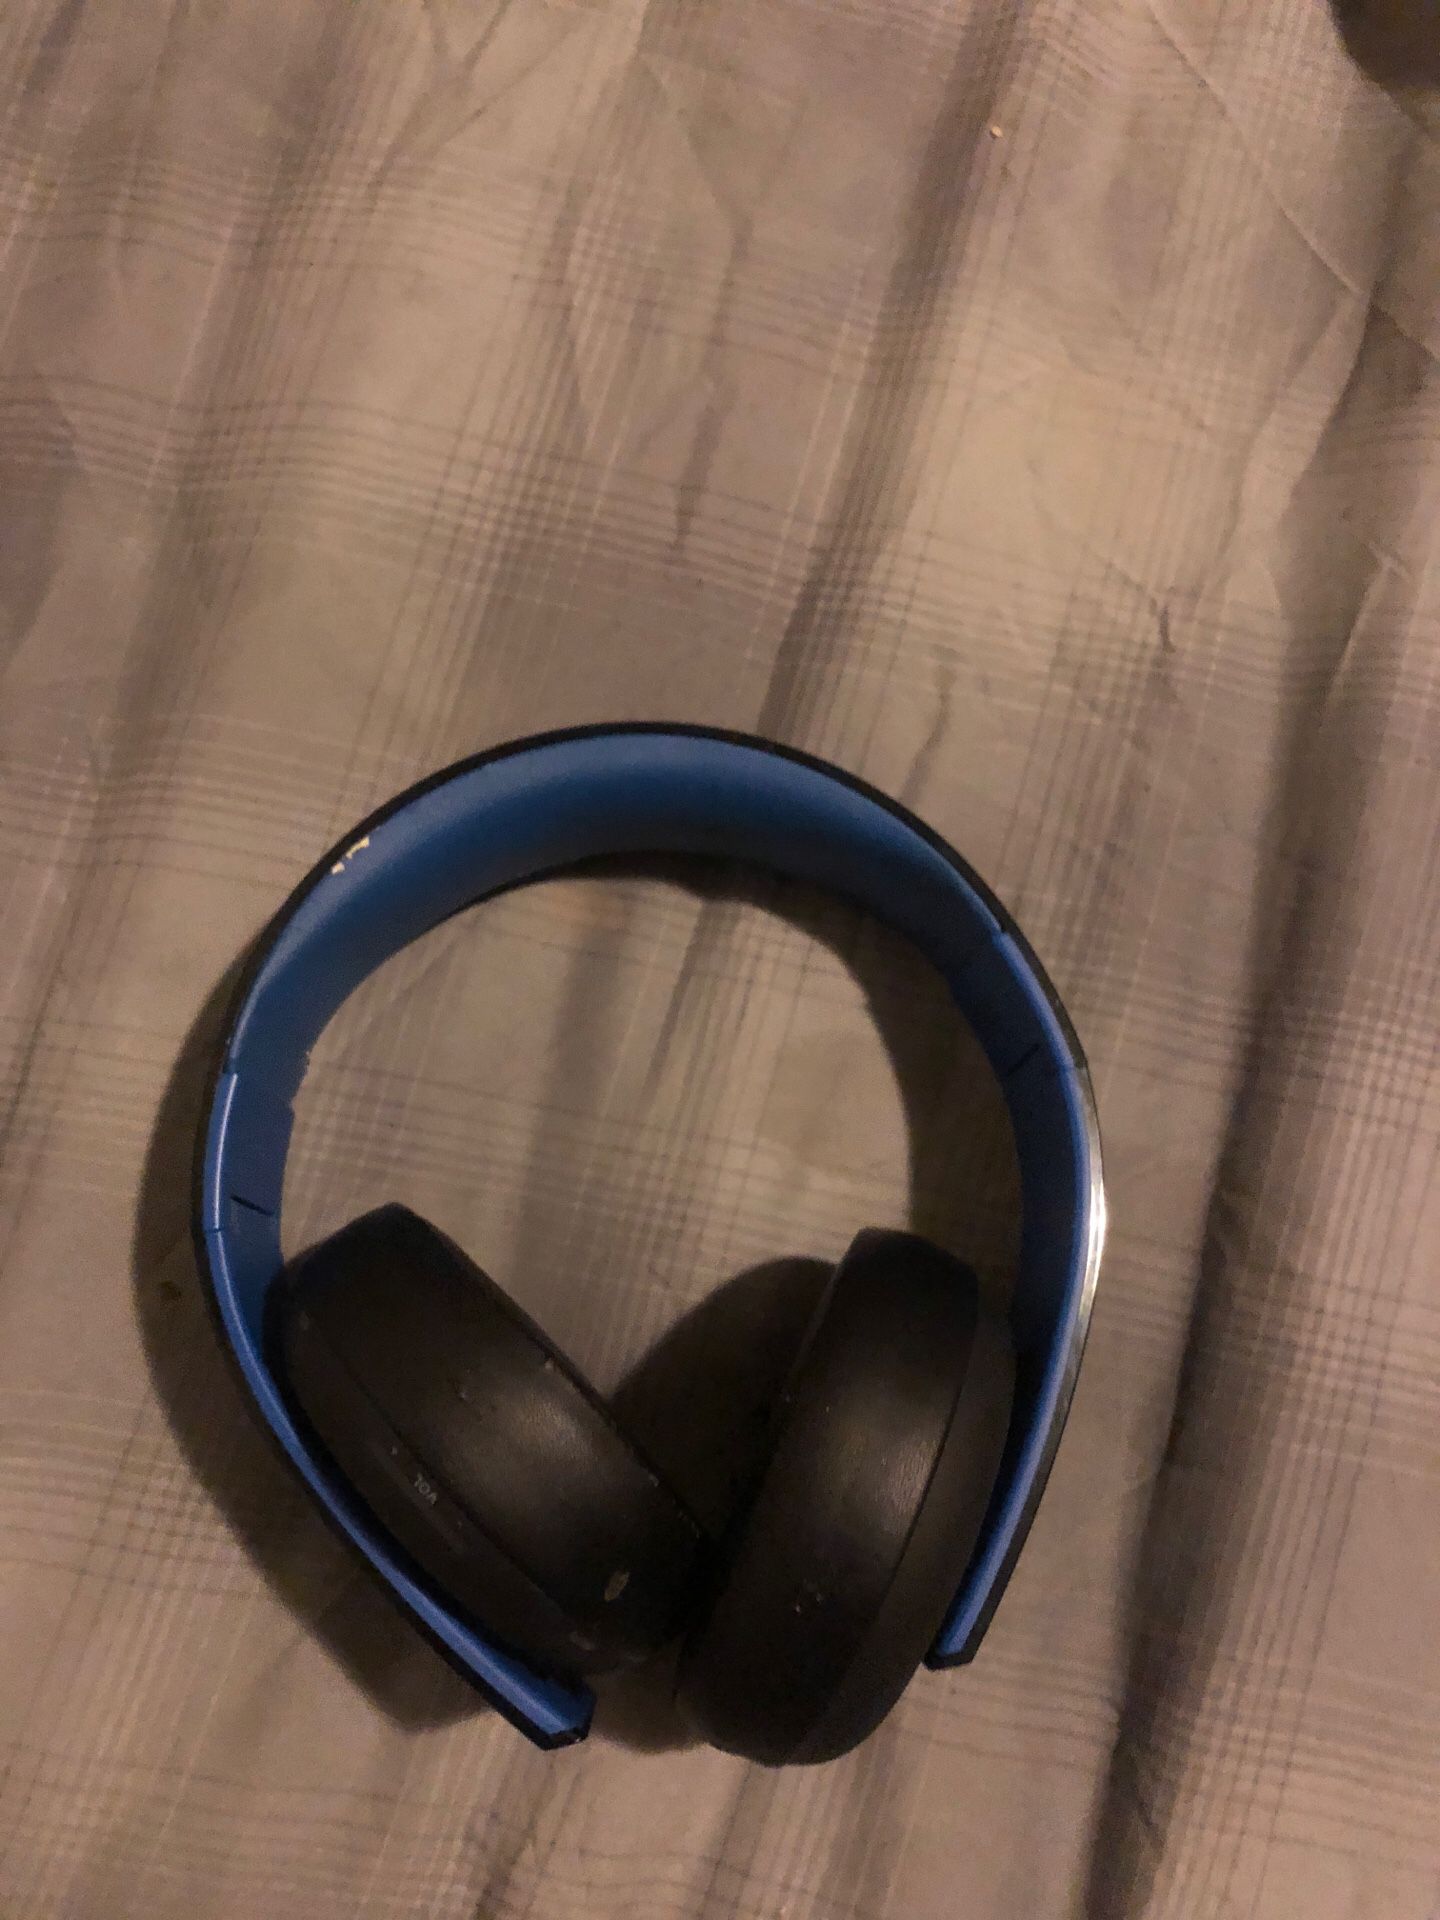 Ps4 wireless head set works great you can tell by the wear it has its my favorite for ps4